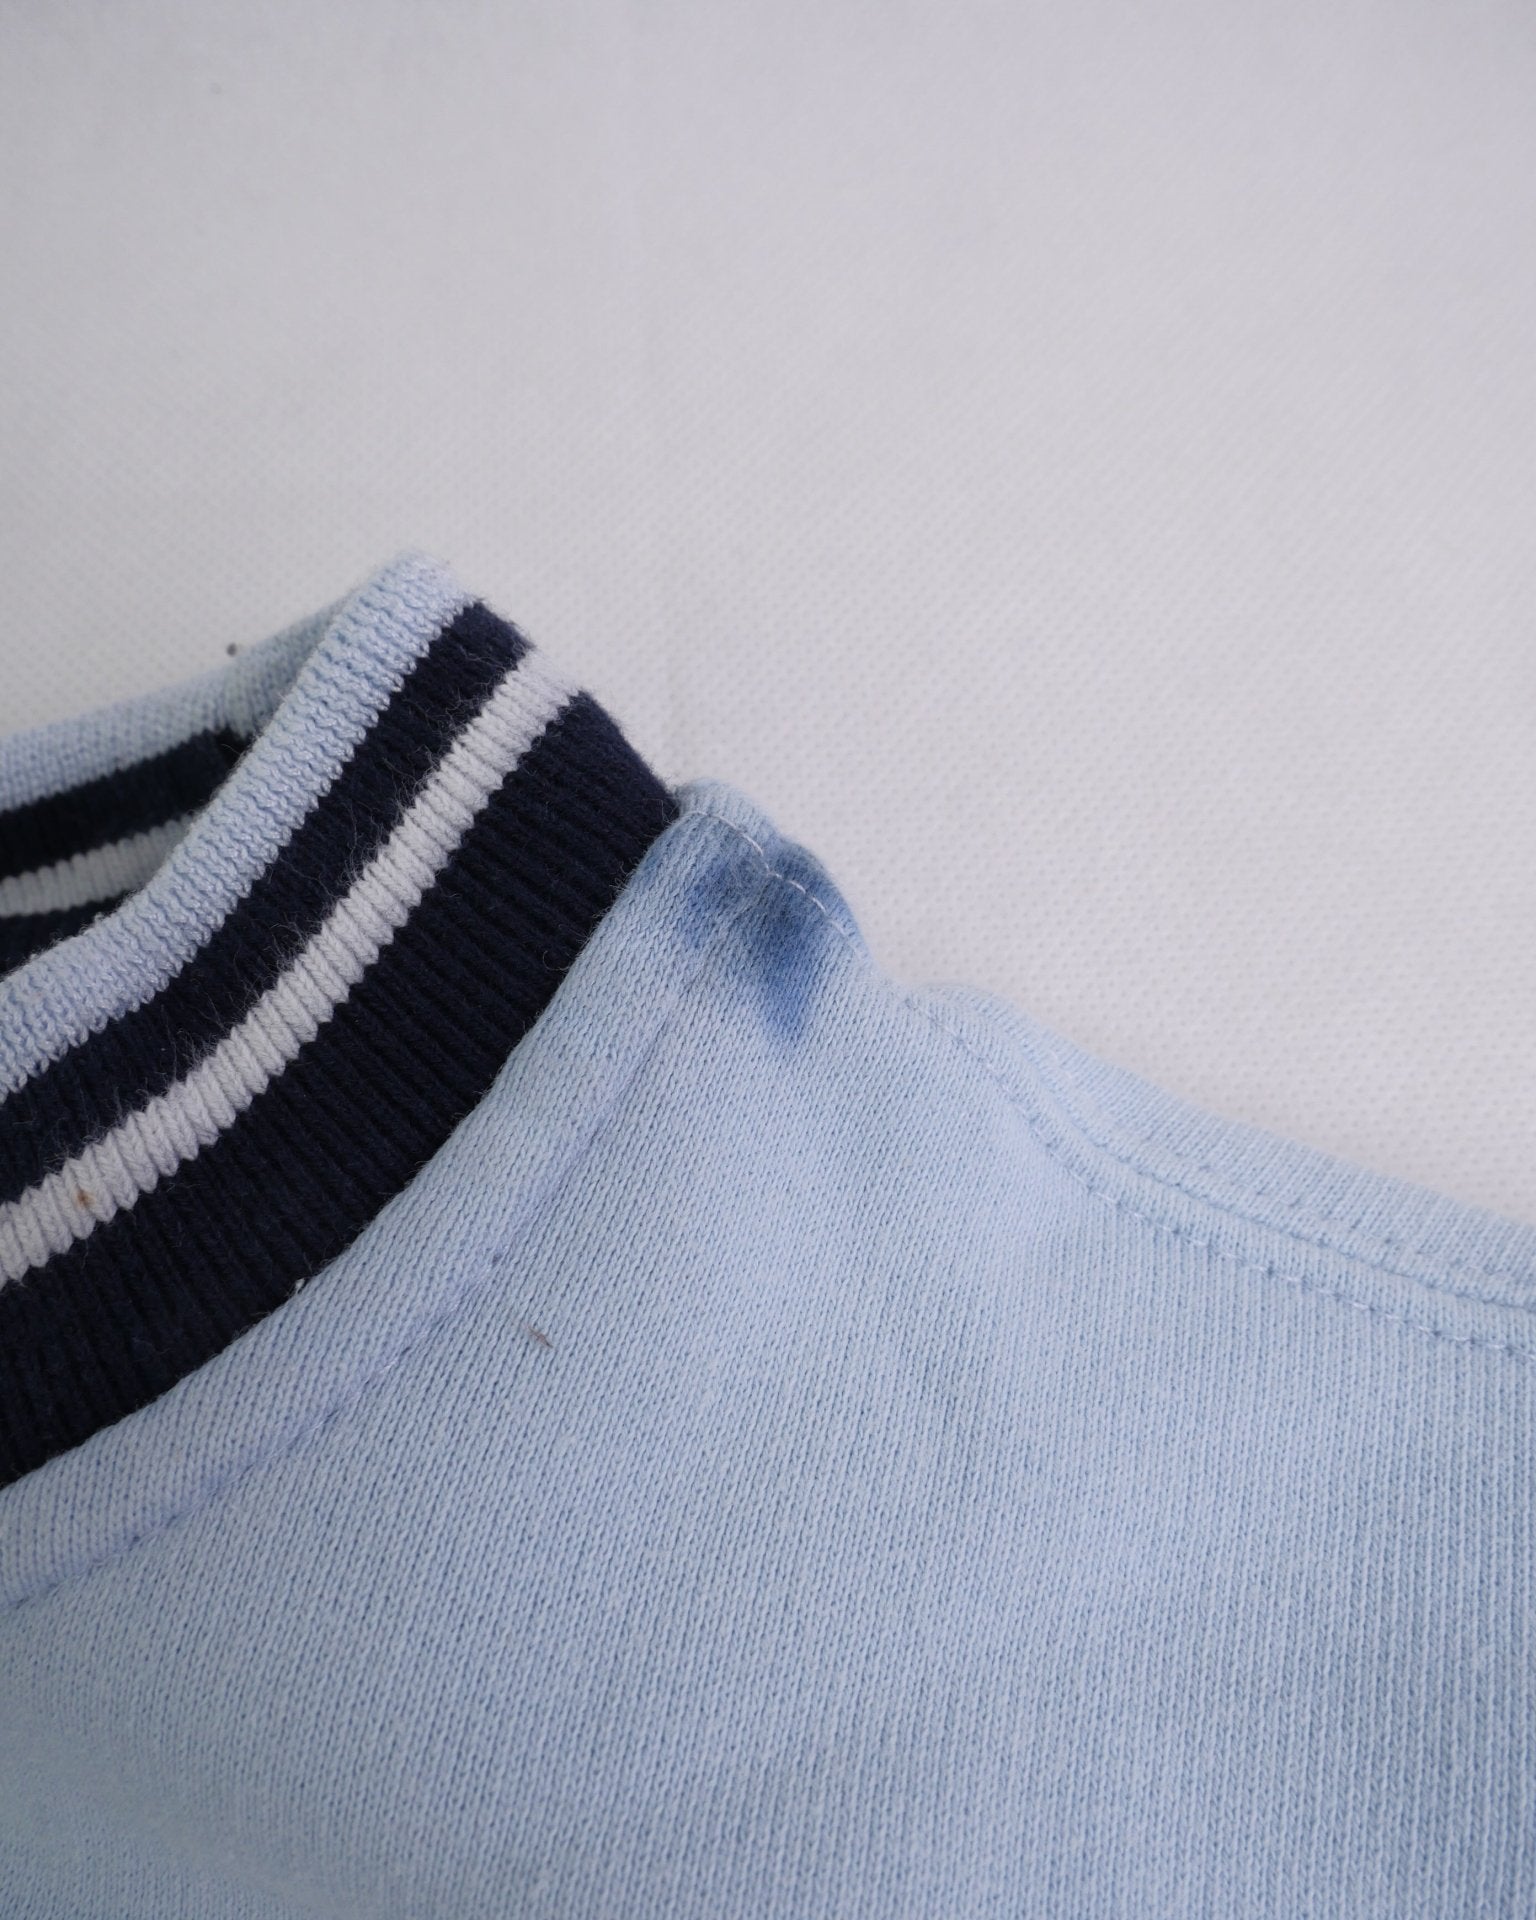 Nautica embroidered Spellout babyblue Sweater - Peeces